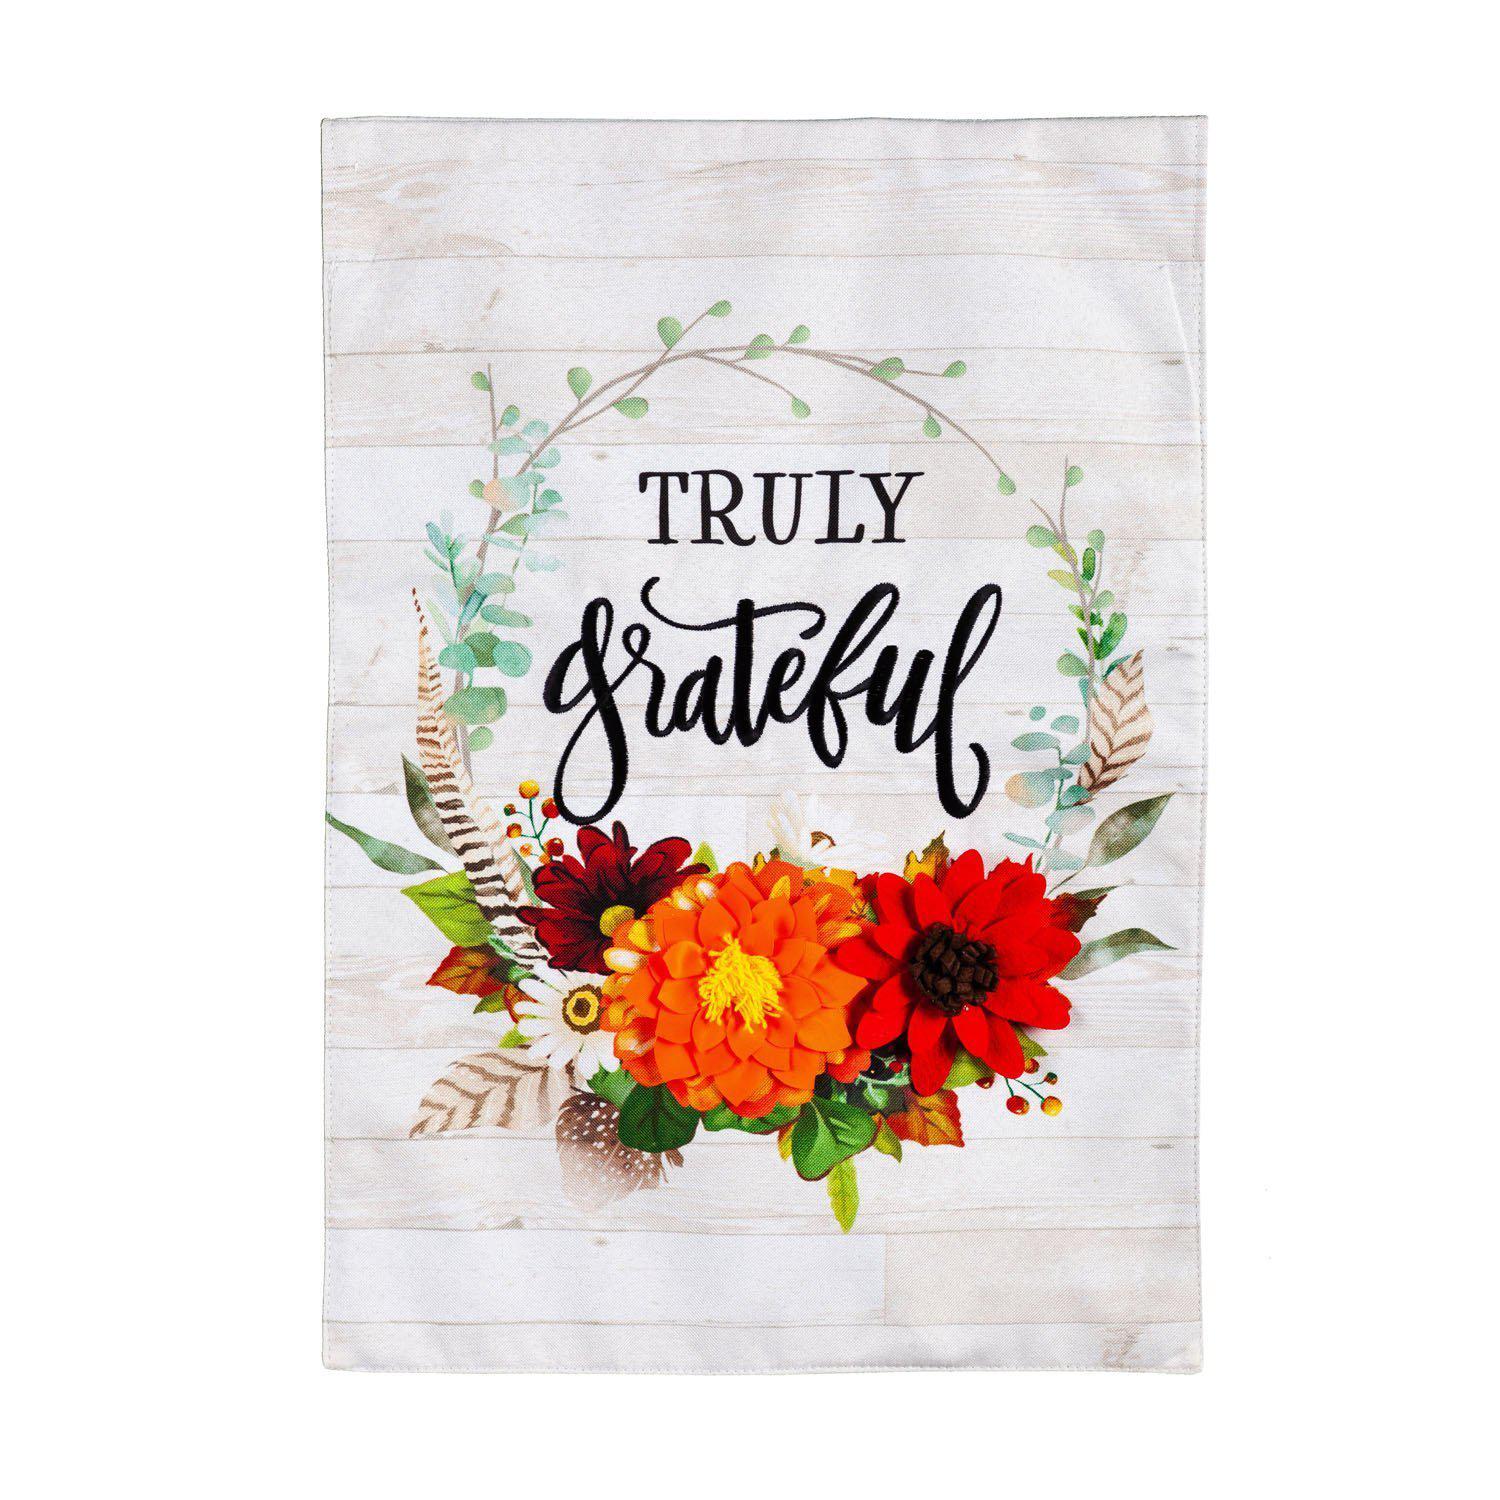 The Truly Grateful garden flag features a wreath of flowers and vines and the words "Truly Grateful" in the center. 